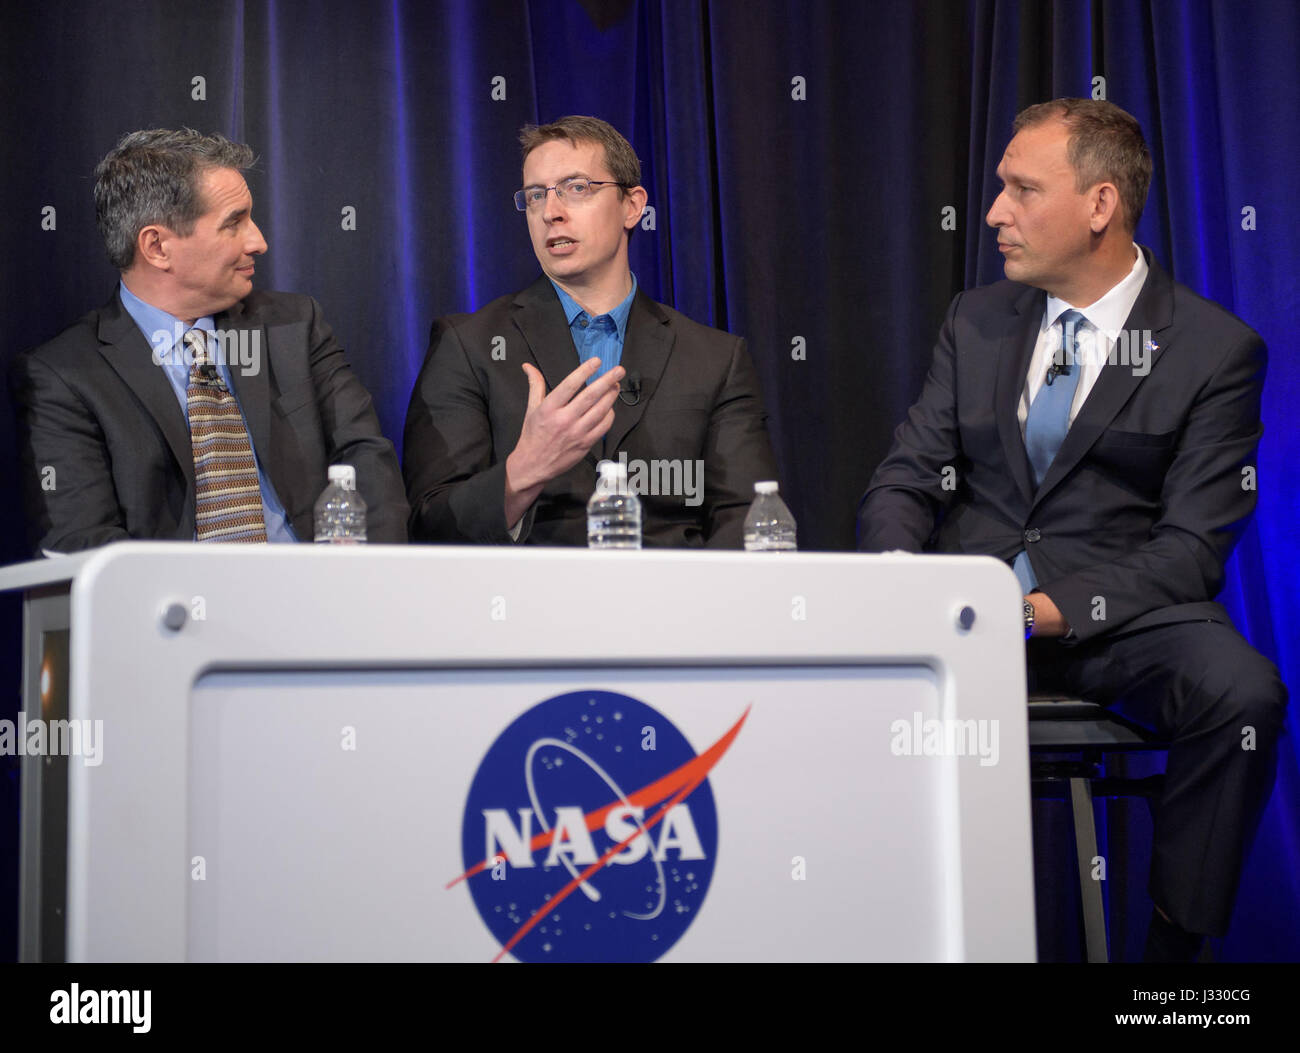 Manager of NASA's Spitzer Science Center at Caltech/IPAC, Pasadena, California Sean Carey, left, University of Liege in Belgium Astronomer Michael Gillon, center, and NASA Associate Administrator of the Science Mission Directorate Thomas Zurbuchen present research findings during a TRAPPIST-1 planets briefing, Wednesday, Feb. 22, 2017 at NASA Headquarters in Washington. Researchers revealed the first known system of seven Earth-size planets around a single star called TRAPPIST-1. Photo Credit: (NASA/Bill Ingalls)  More: exoplanets.nasa.gov/trappist1/ ( https://exoplanets.nasa.gov/trappist1/ ) Stock Photo